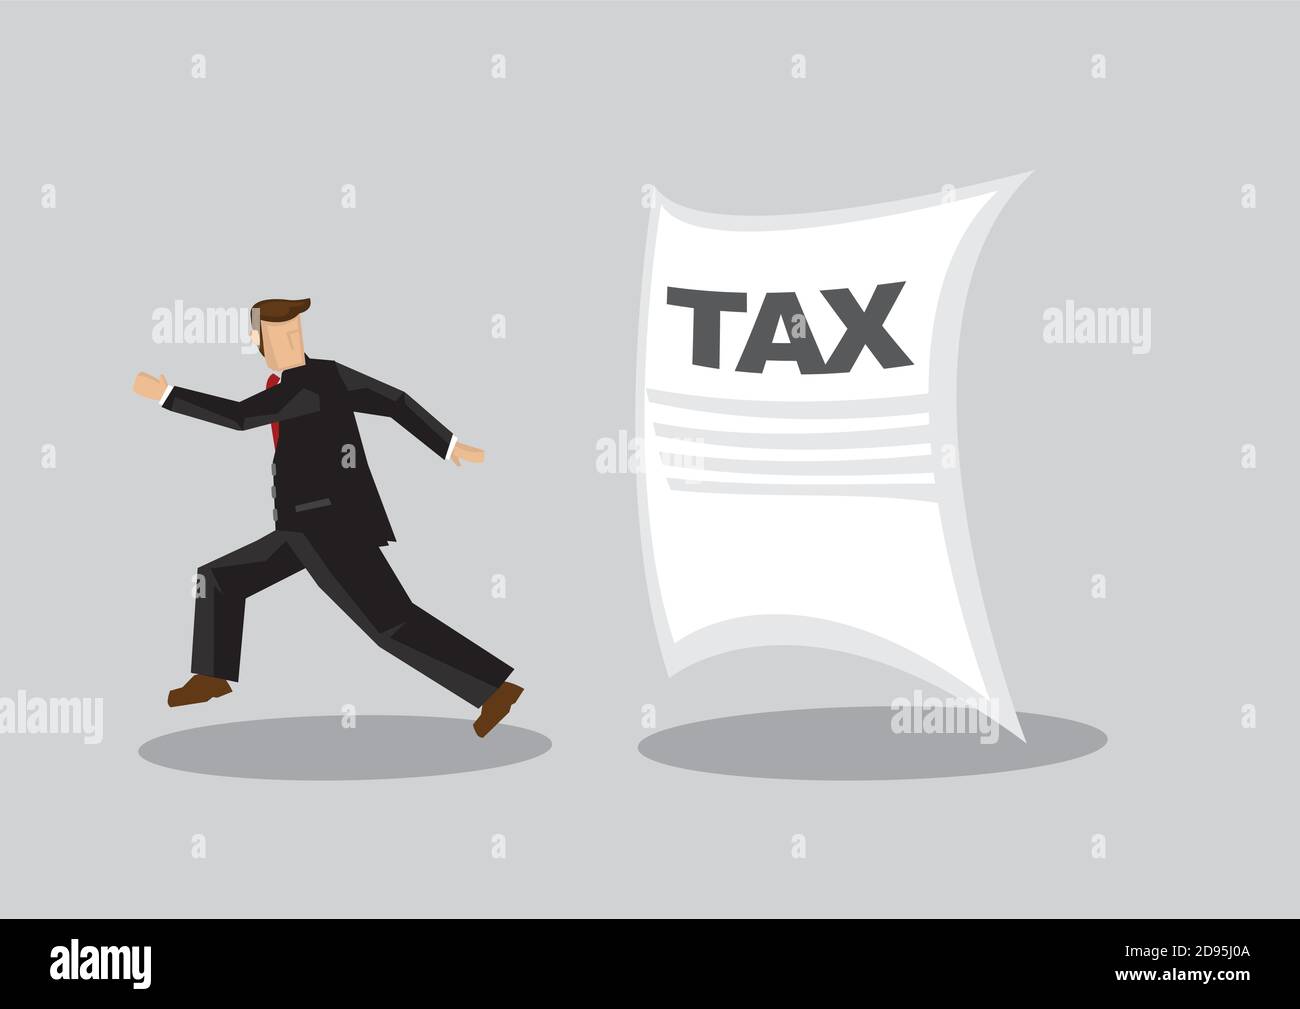 Cartoon businessman running away from Tax notice chasing behind him. Creative vector illustration on concept of tax evasion by businesses isolated on Stock Vector